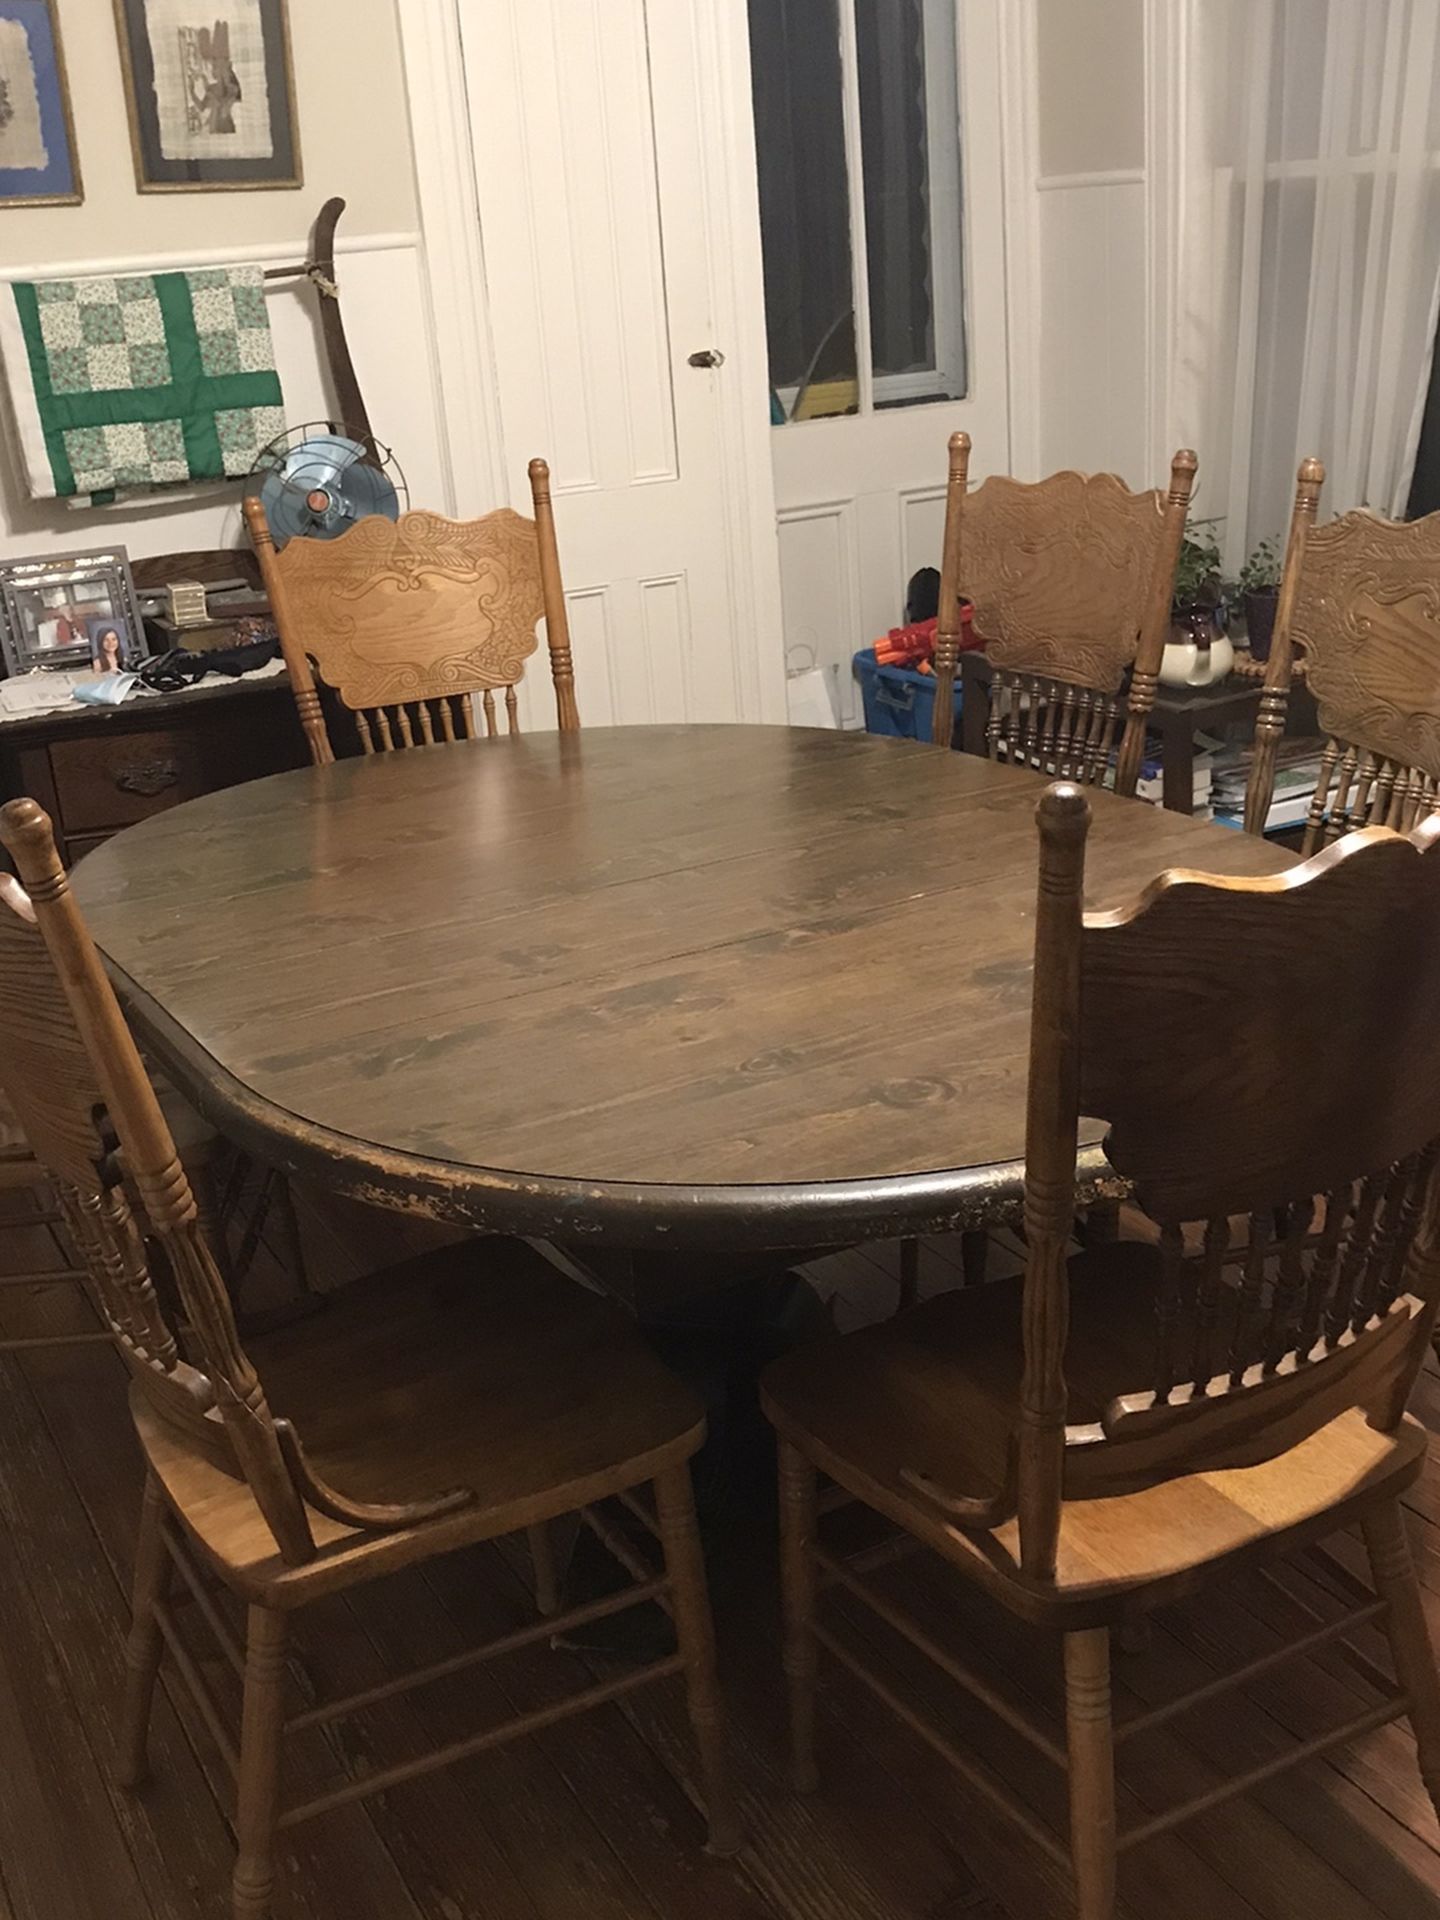 FREE: Dining Table And 1 Chair